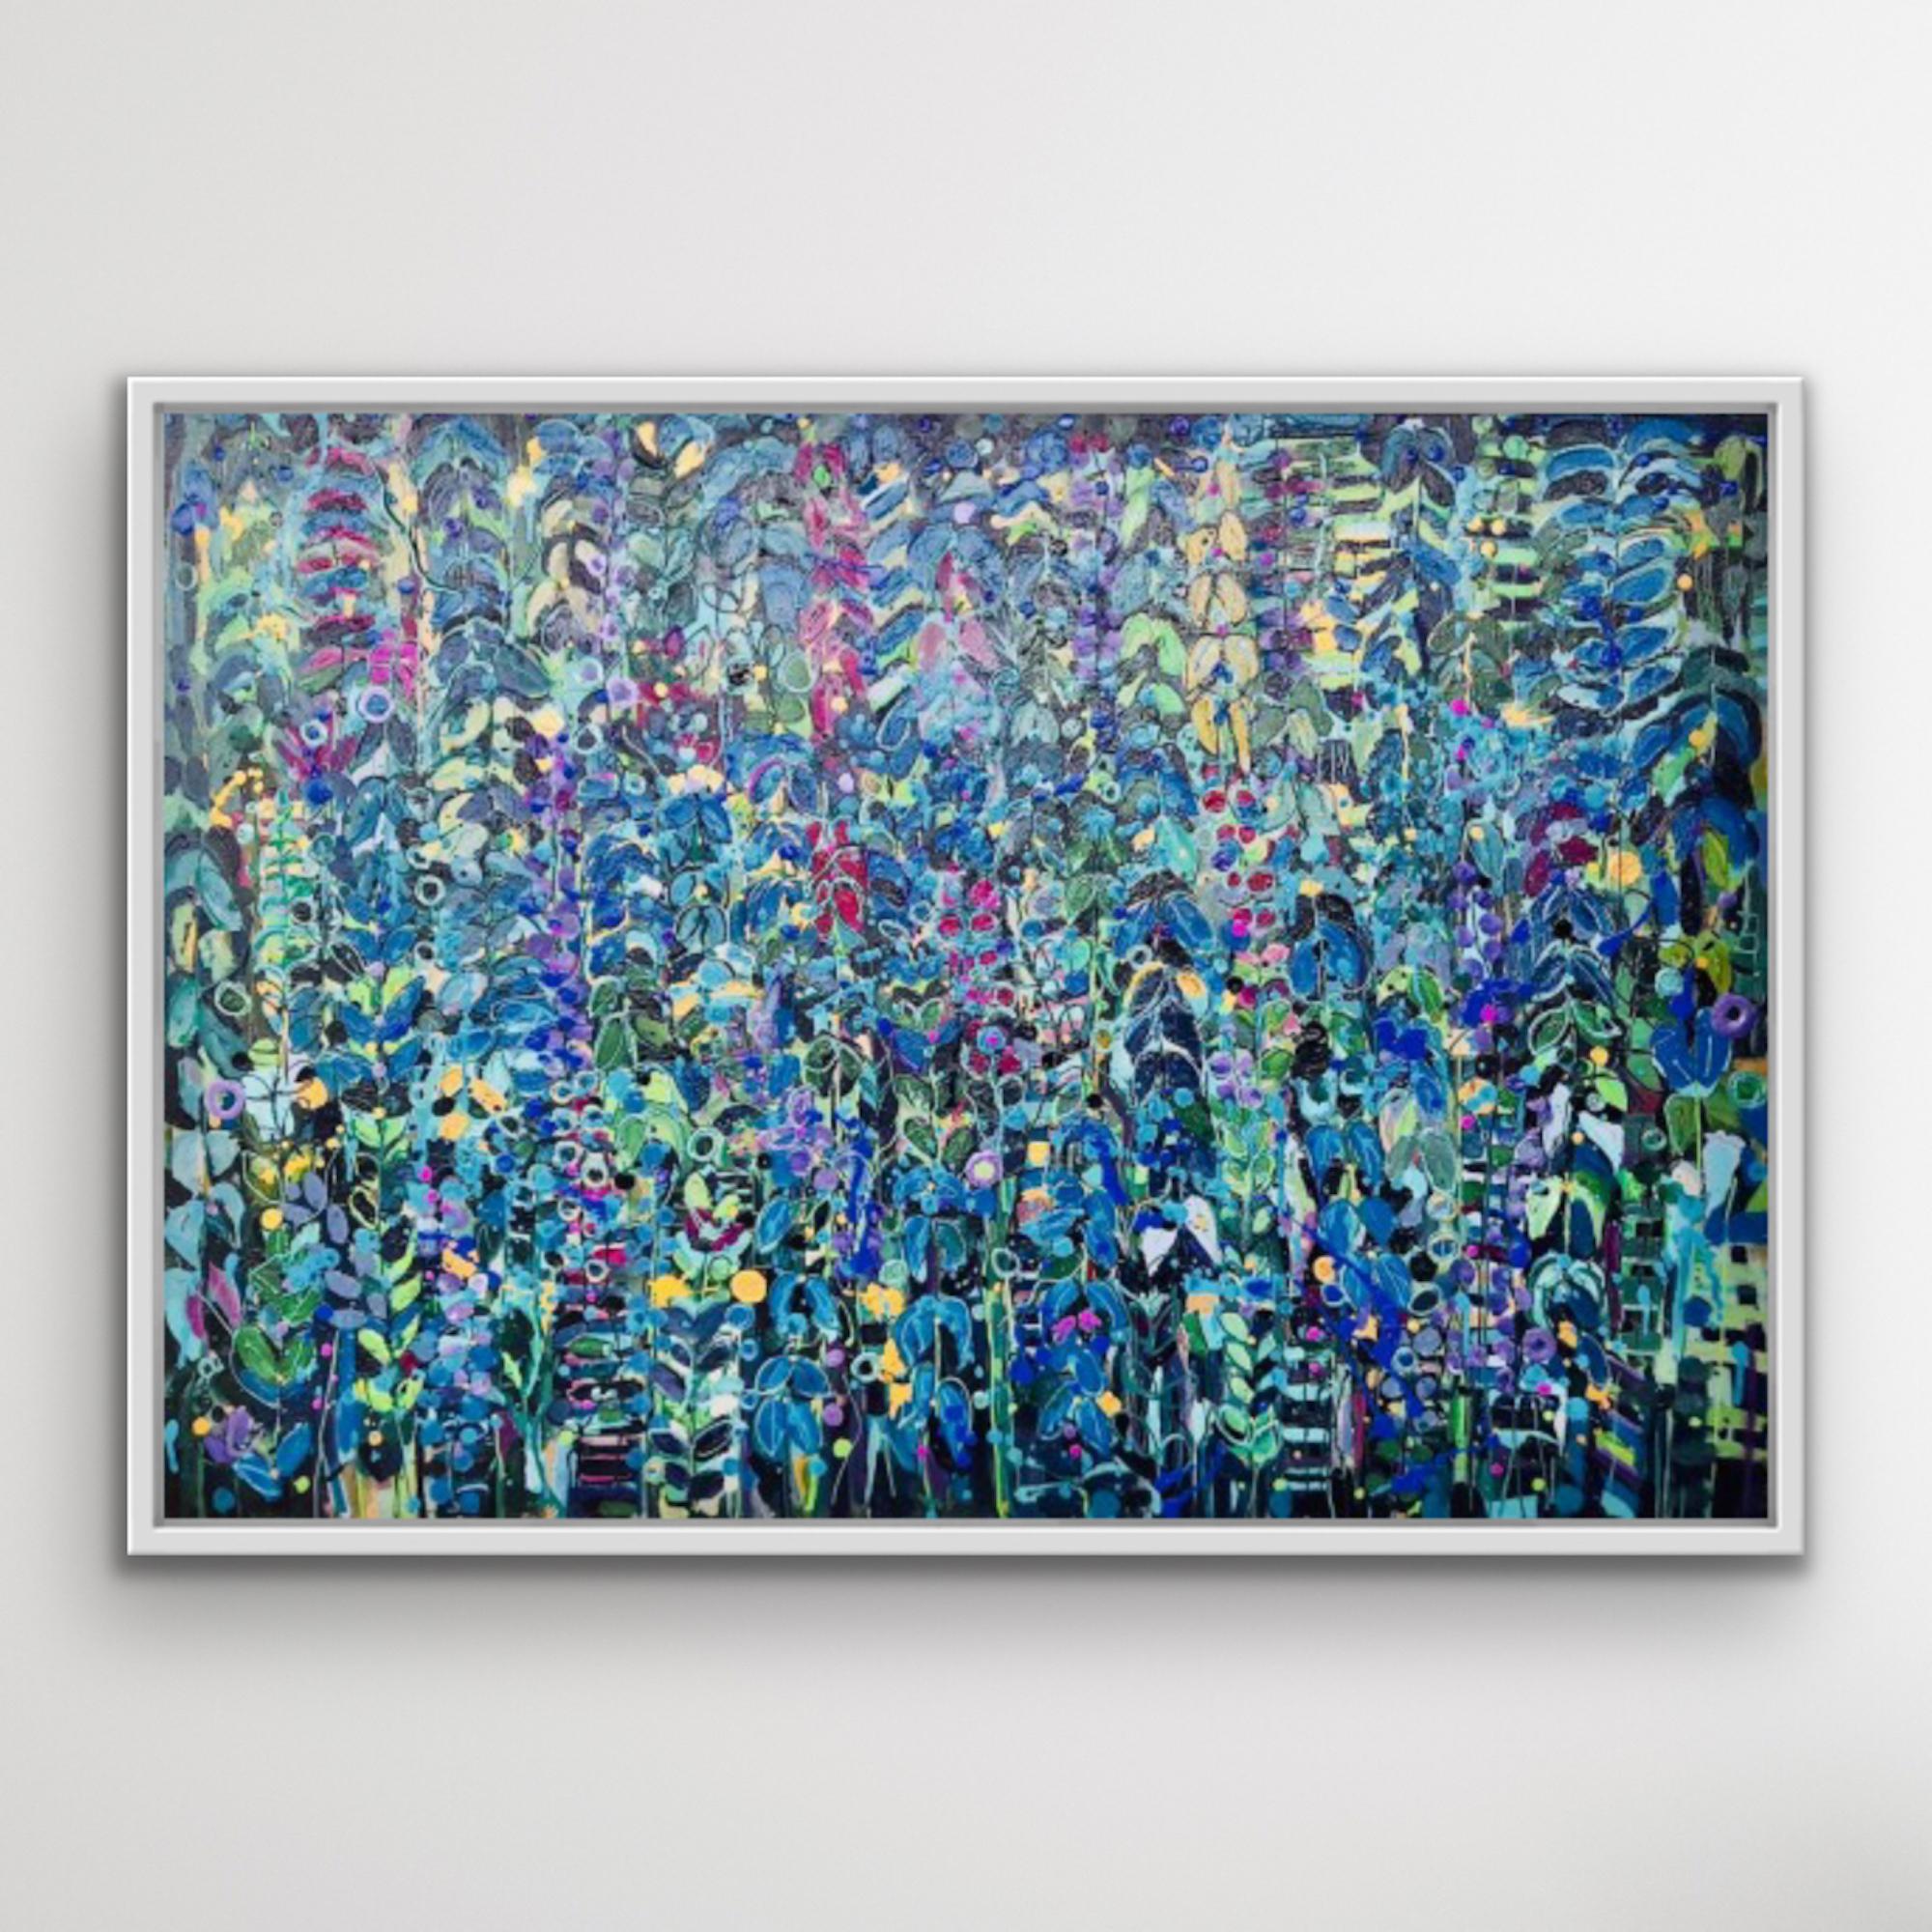 Green and Blue and Purples and Pinks! This is a RIOT of colour and splatter and flowers! This has SO much depth in it - you can look at it forever.

Discover original paintings by Catherine Ruth Church online with Wychwood Art and in our Deddington